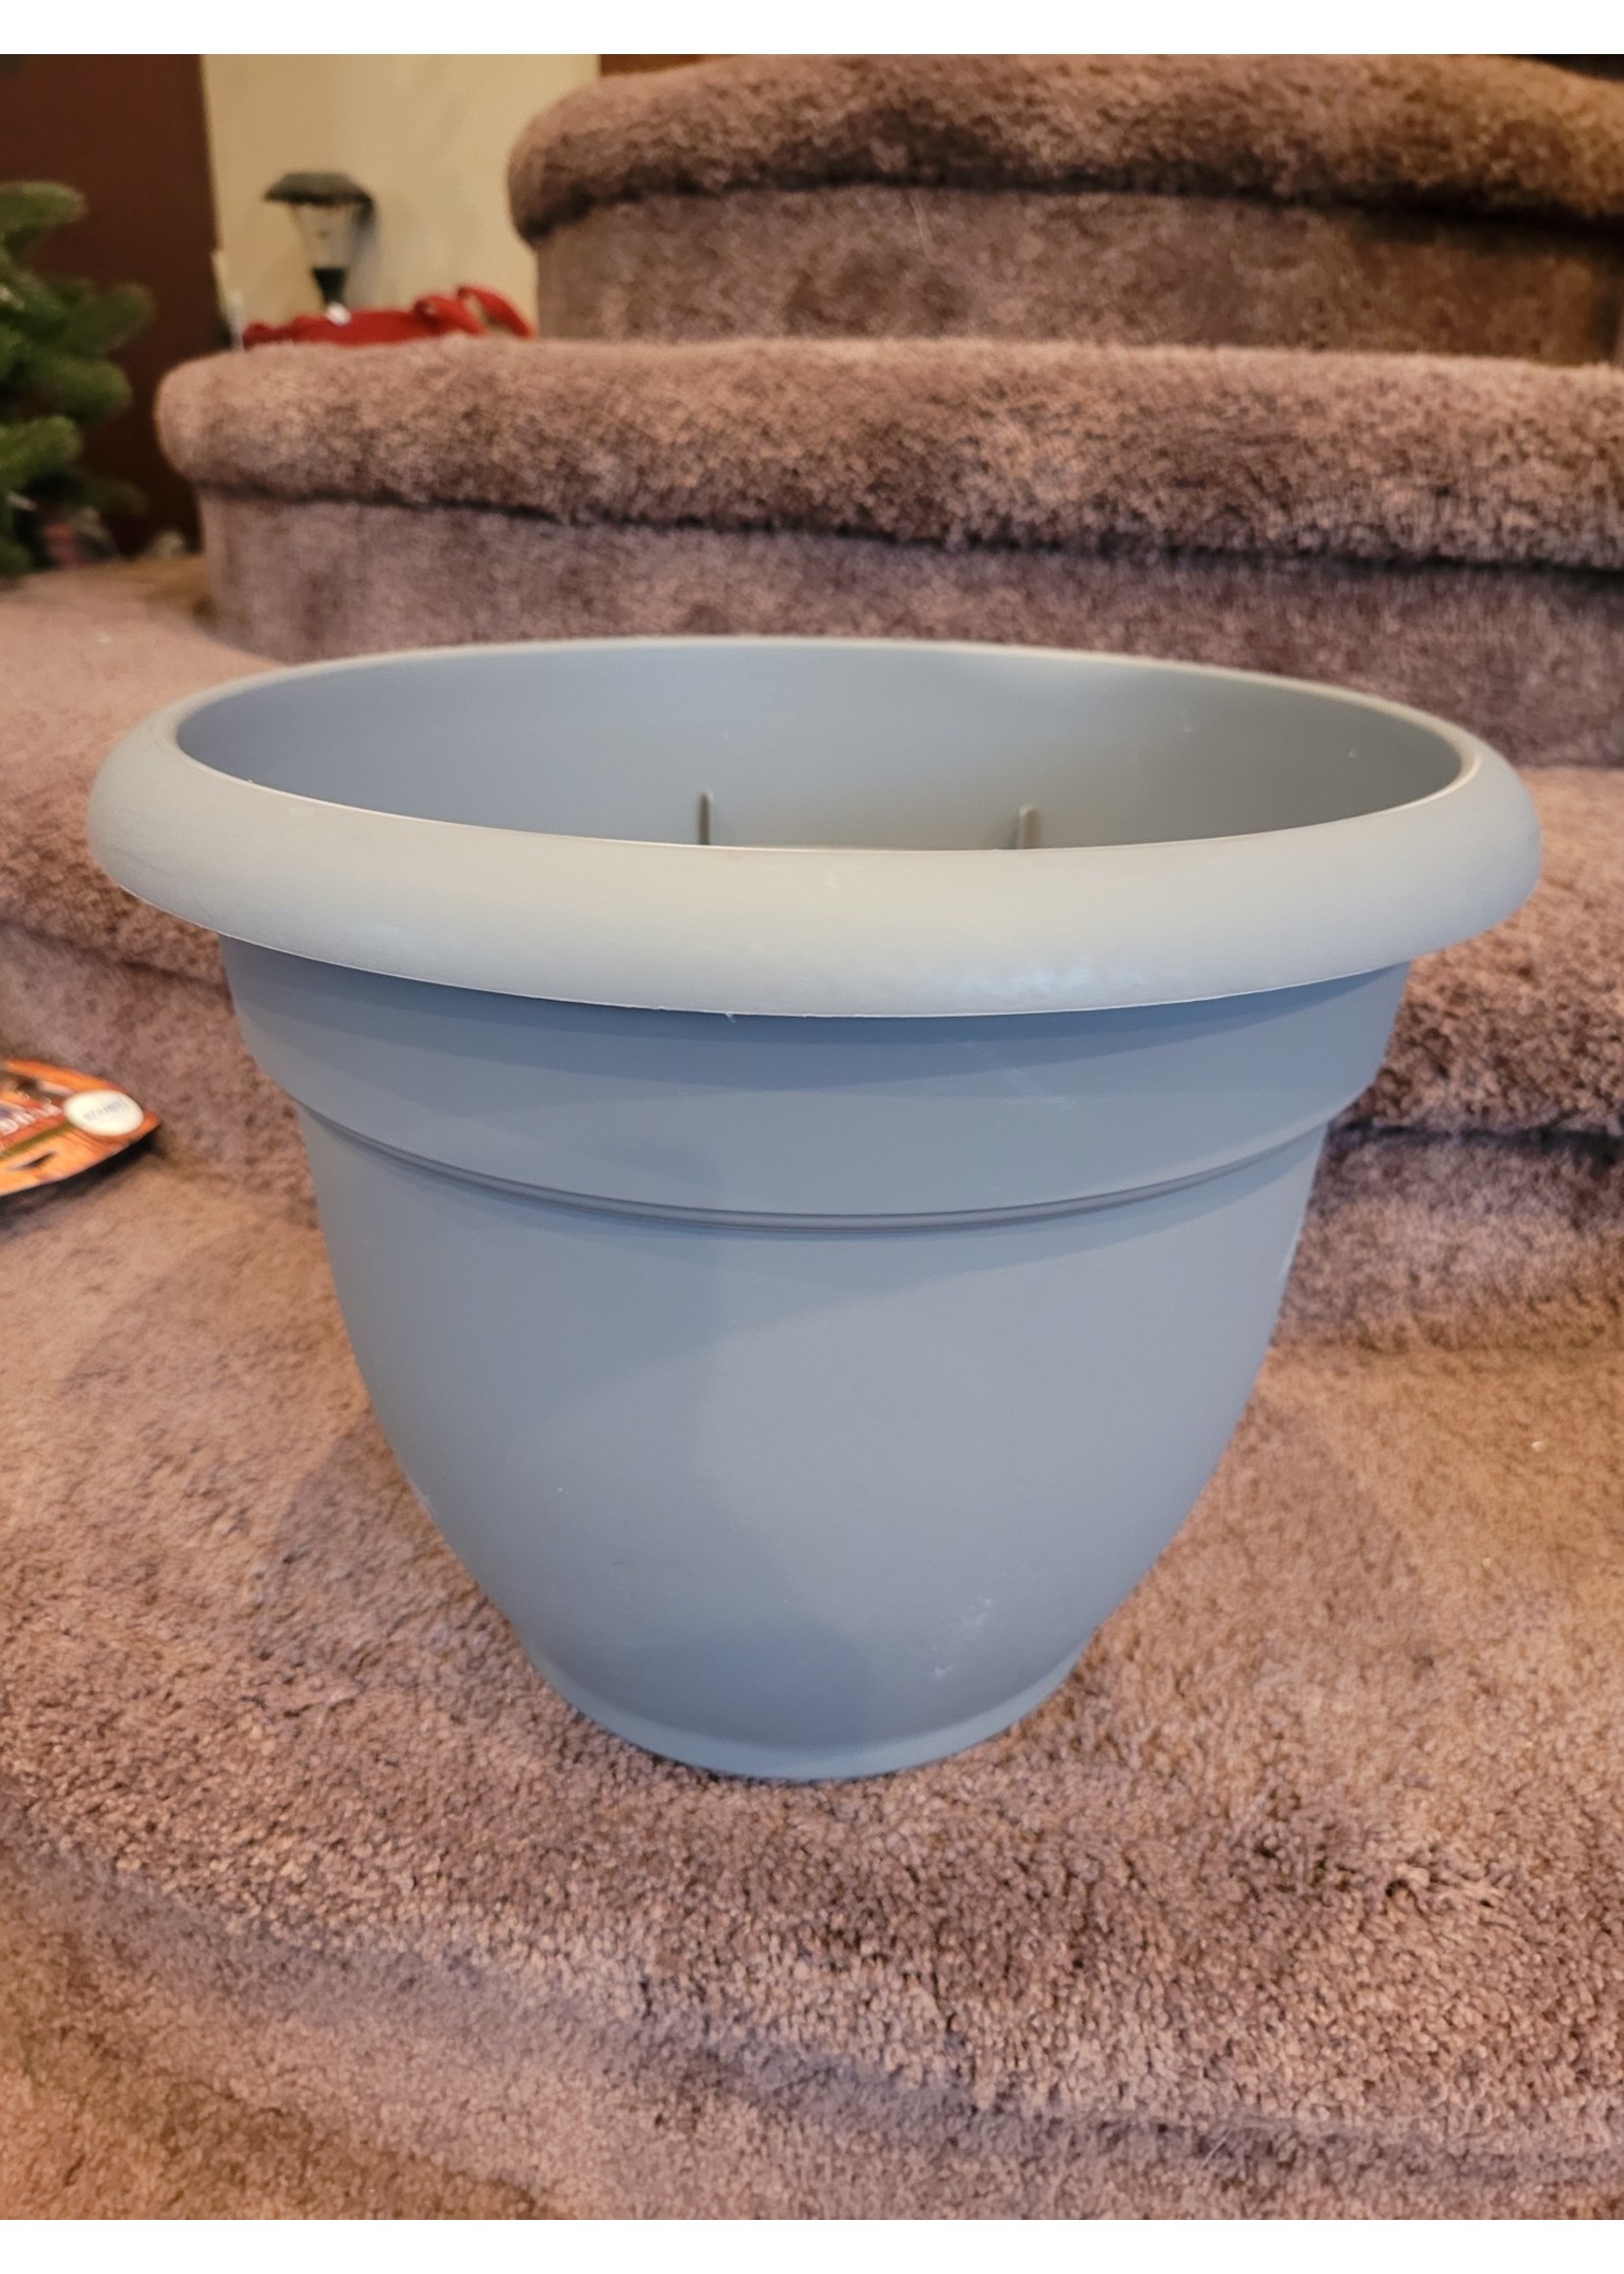 12" Ariana Planter with Self Watering Grid - Charcoal - Bloem